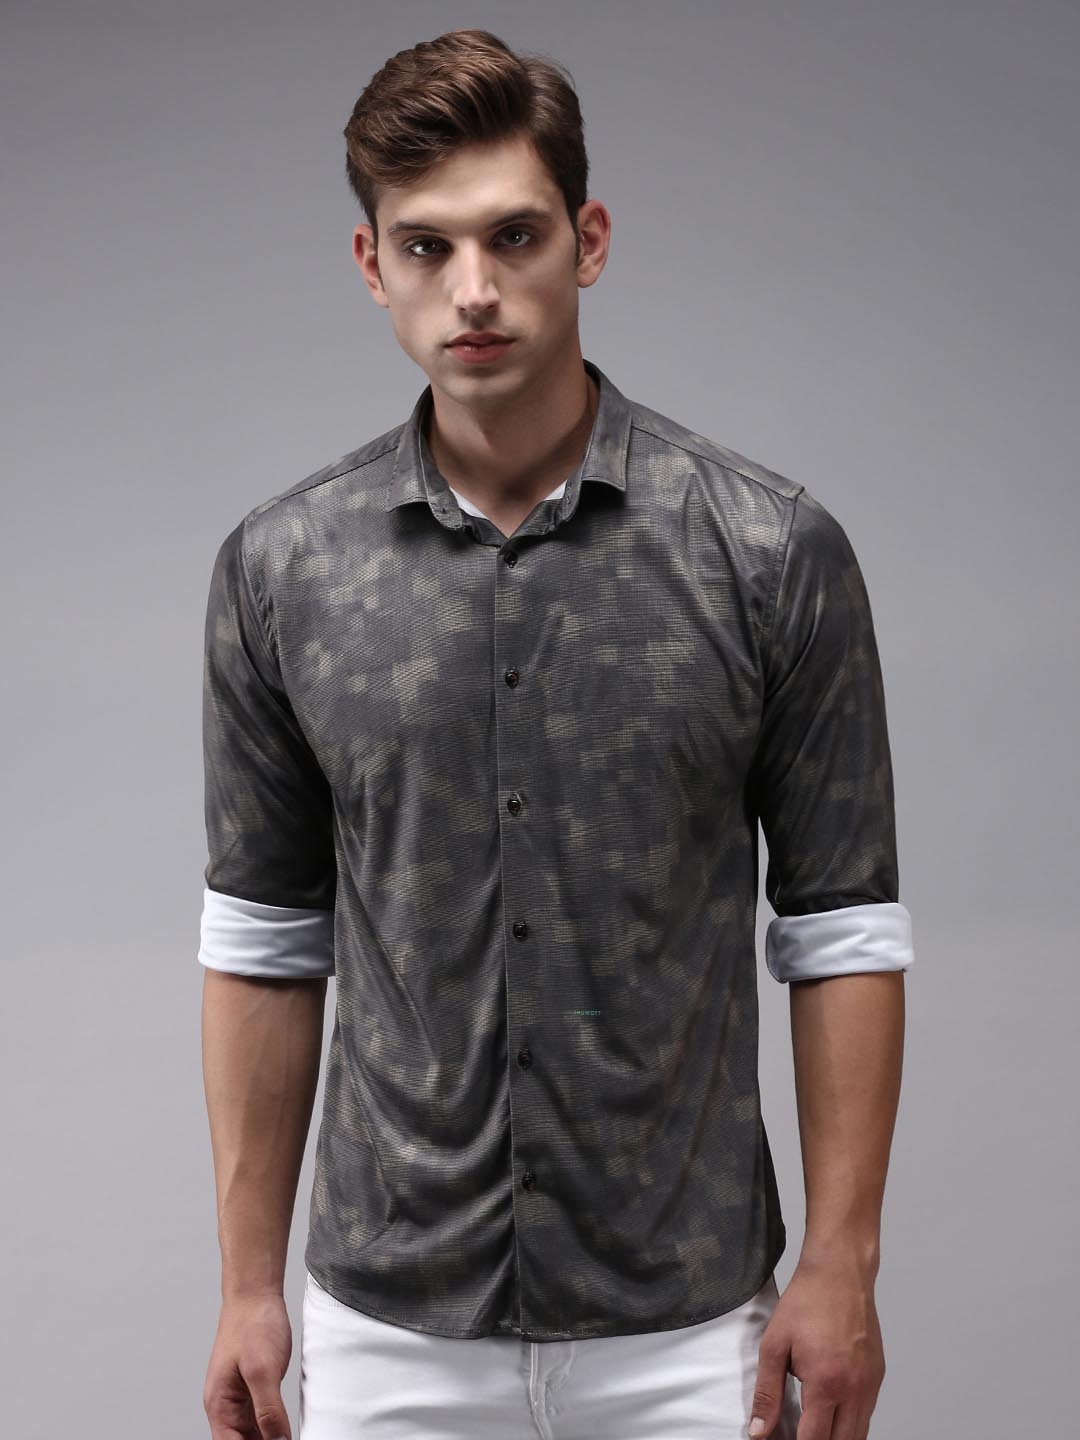 Men's Green Polyester Printed Casual Shirts